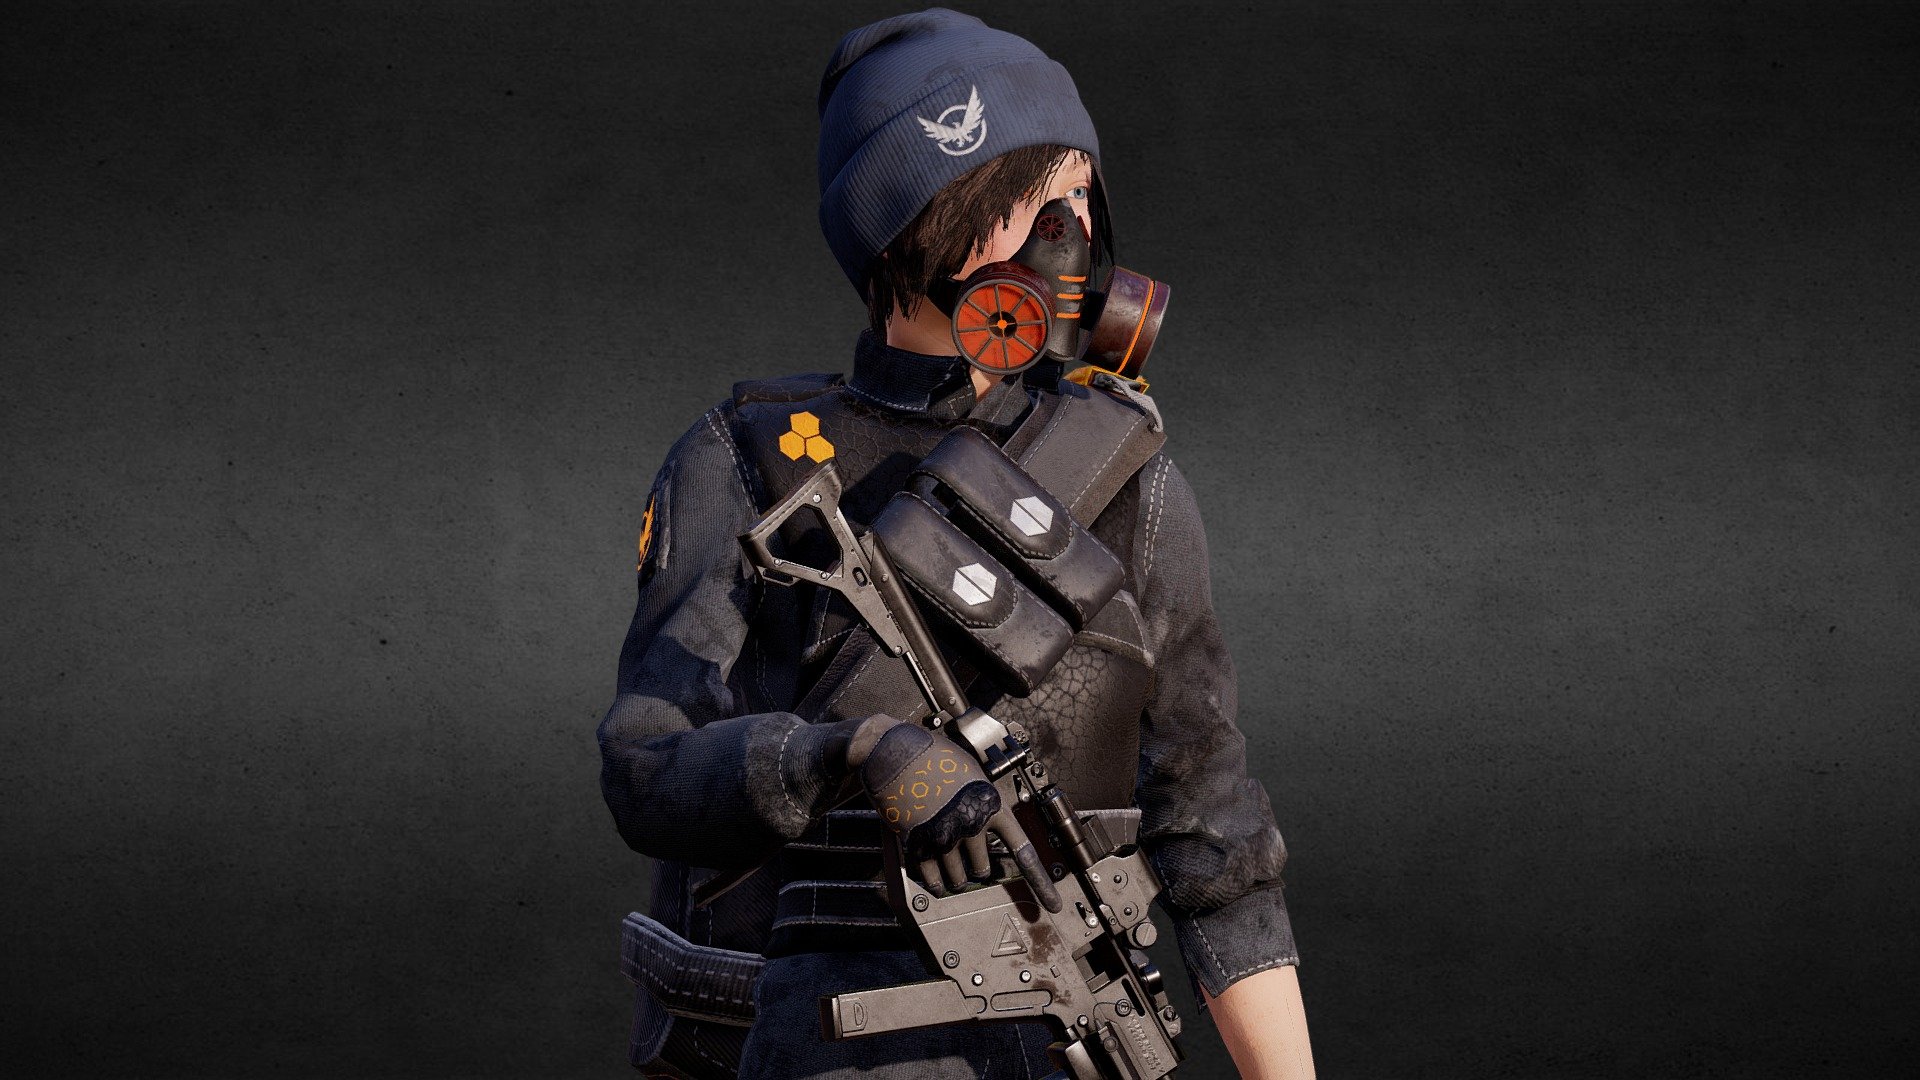 Personal Design created With Blender, marvelous Designer, Substance painter and unreal engine

Here Free Rigged Version for you guys Enjoy&hellip;

you can buy different variants here: https://artstn.co/m/9WkVx - Division Agent (Rigged) - Download Free 3D model by Blue Spirit (@Blue-Spirit) 3d model